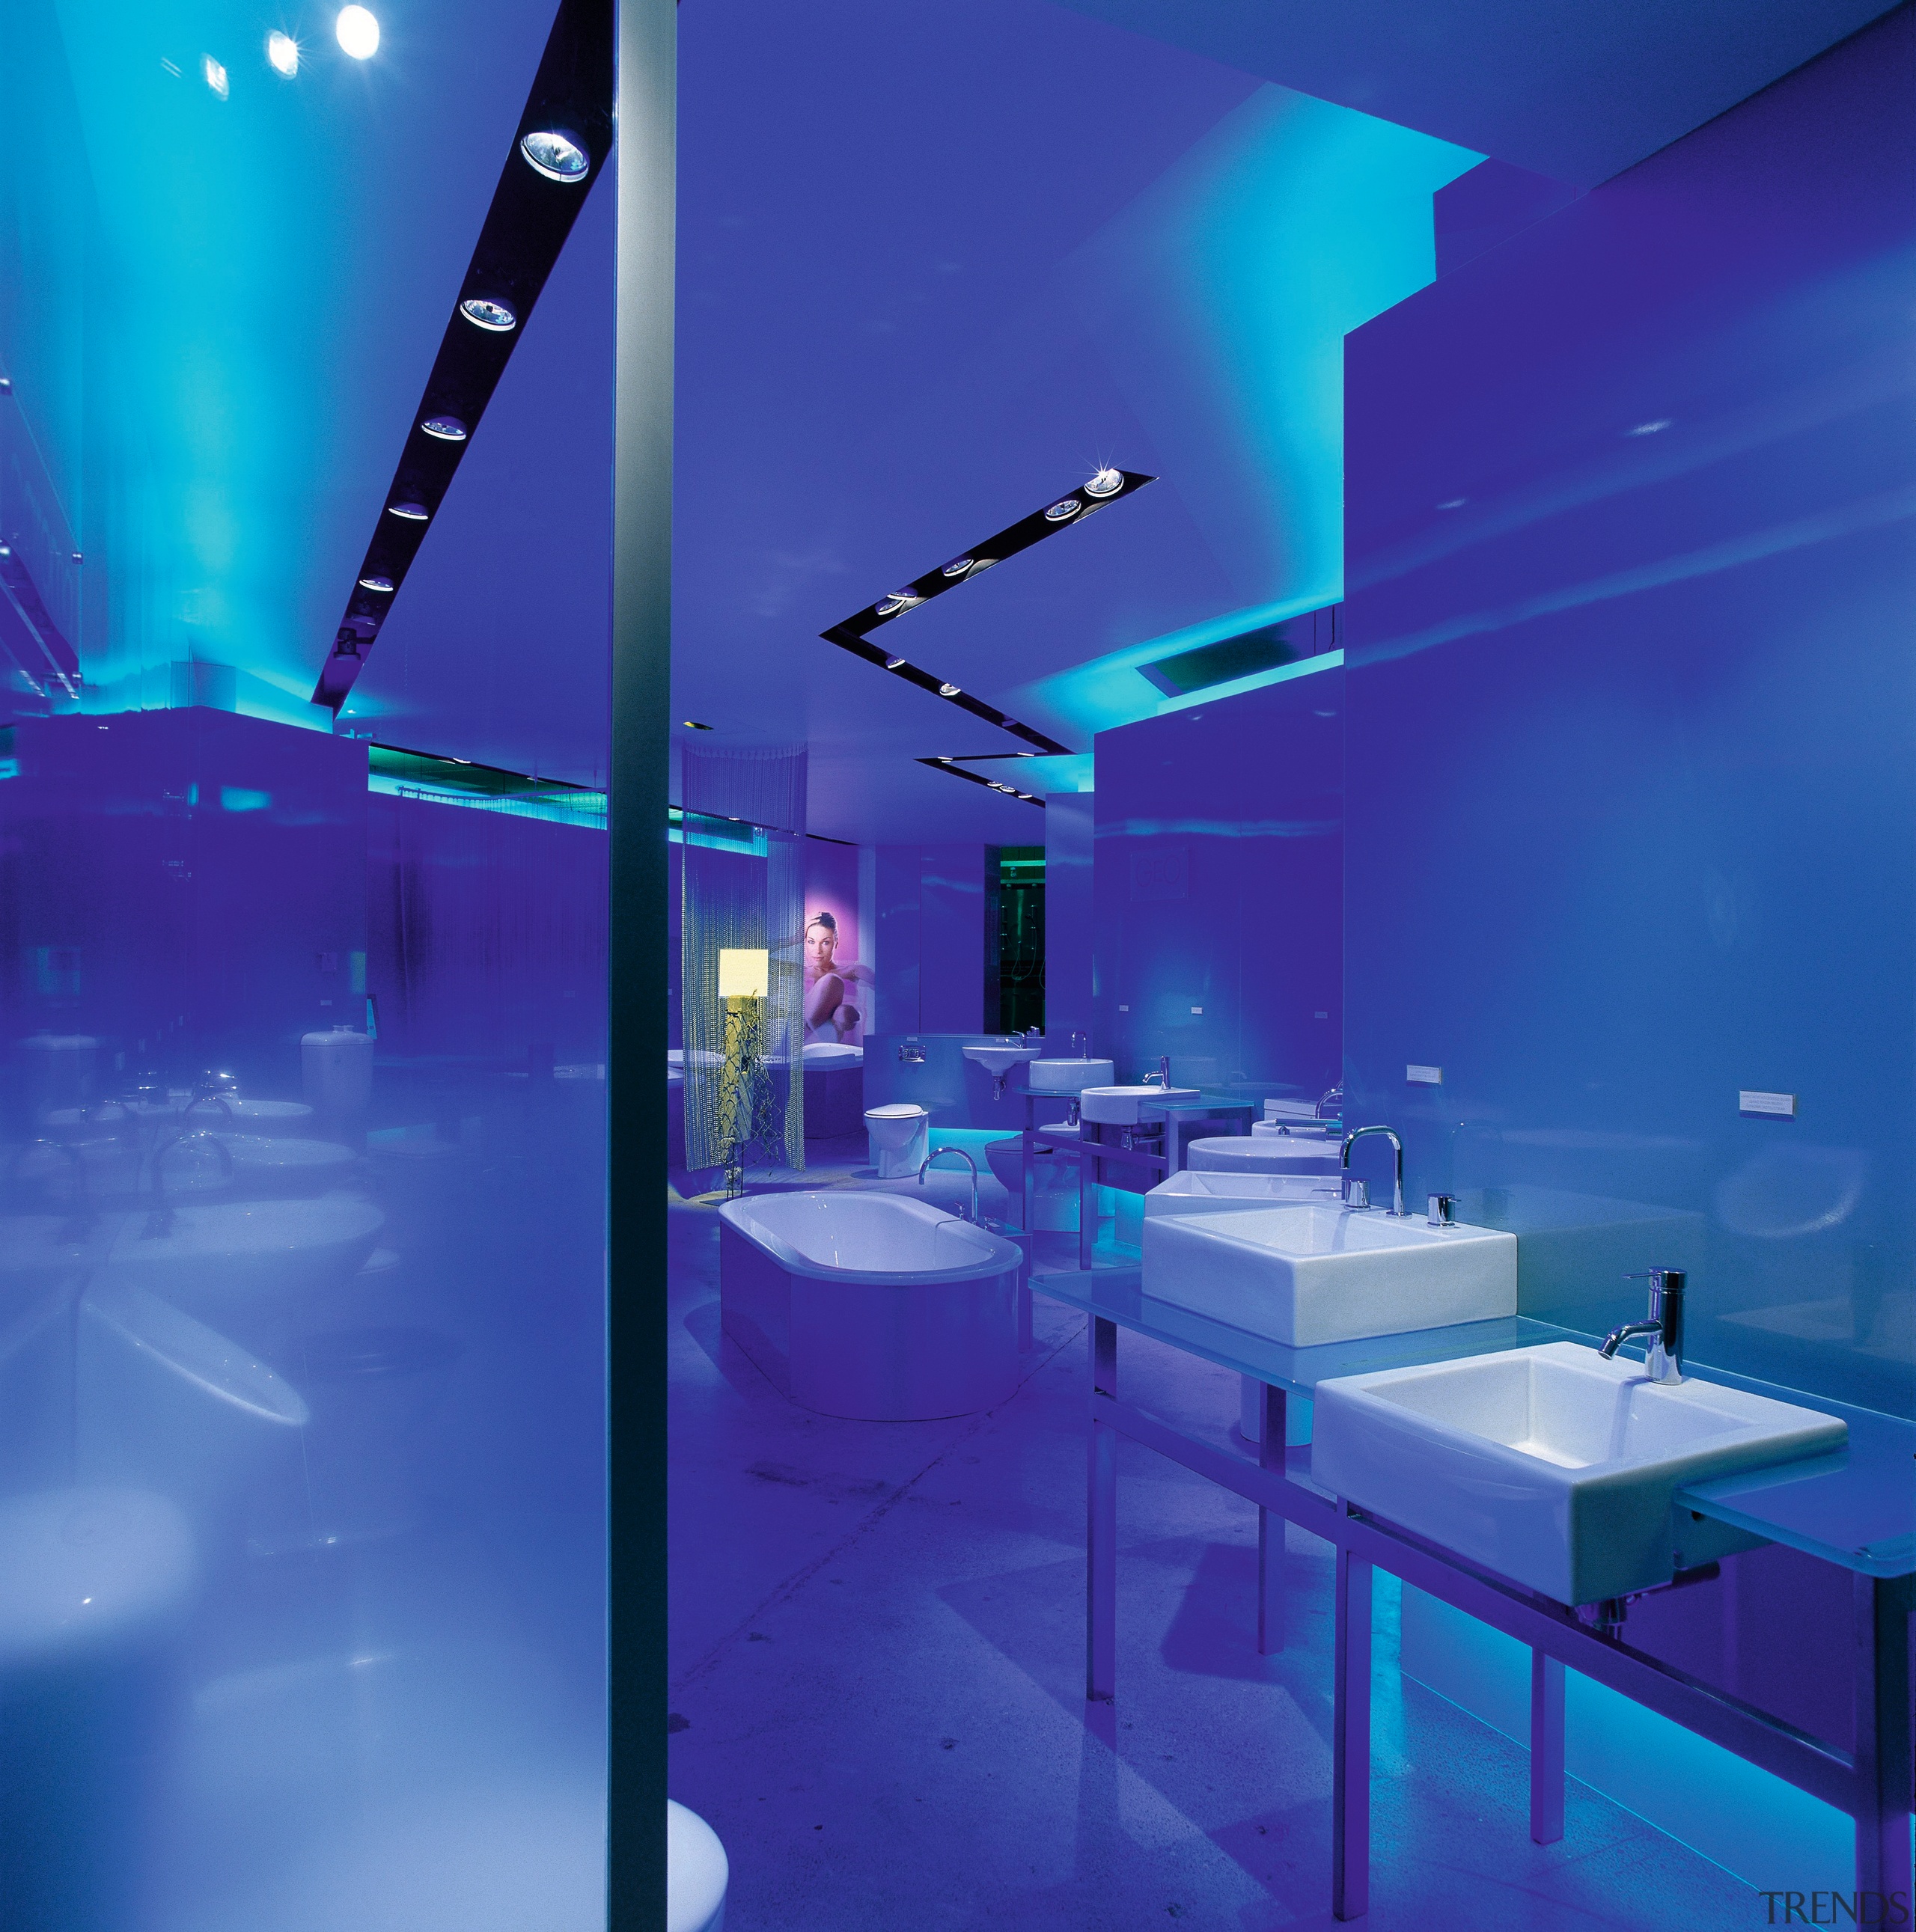 The view of bathroomware in a showroom - architecture, blue, ceiling, glass, interior design, light, lighting, purple, blue